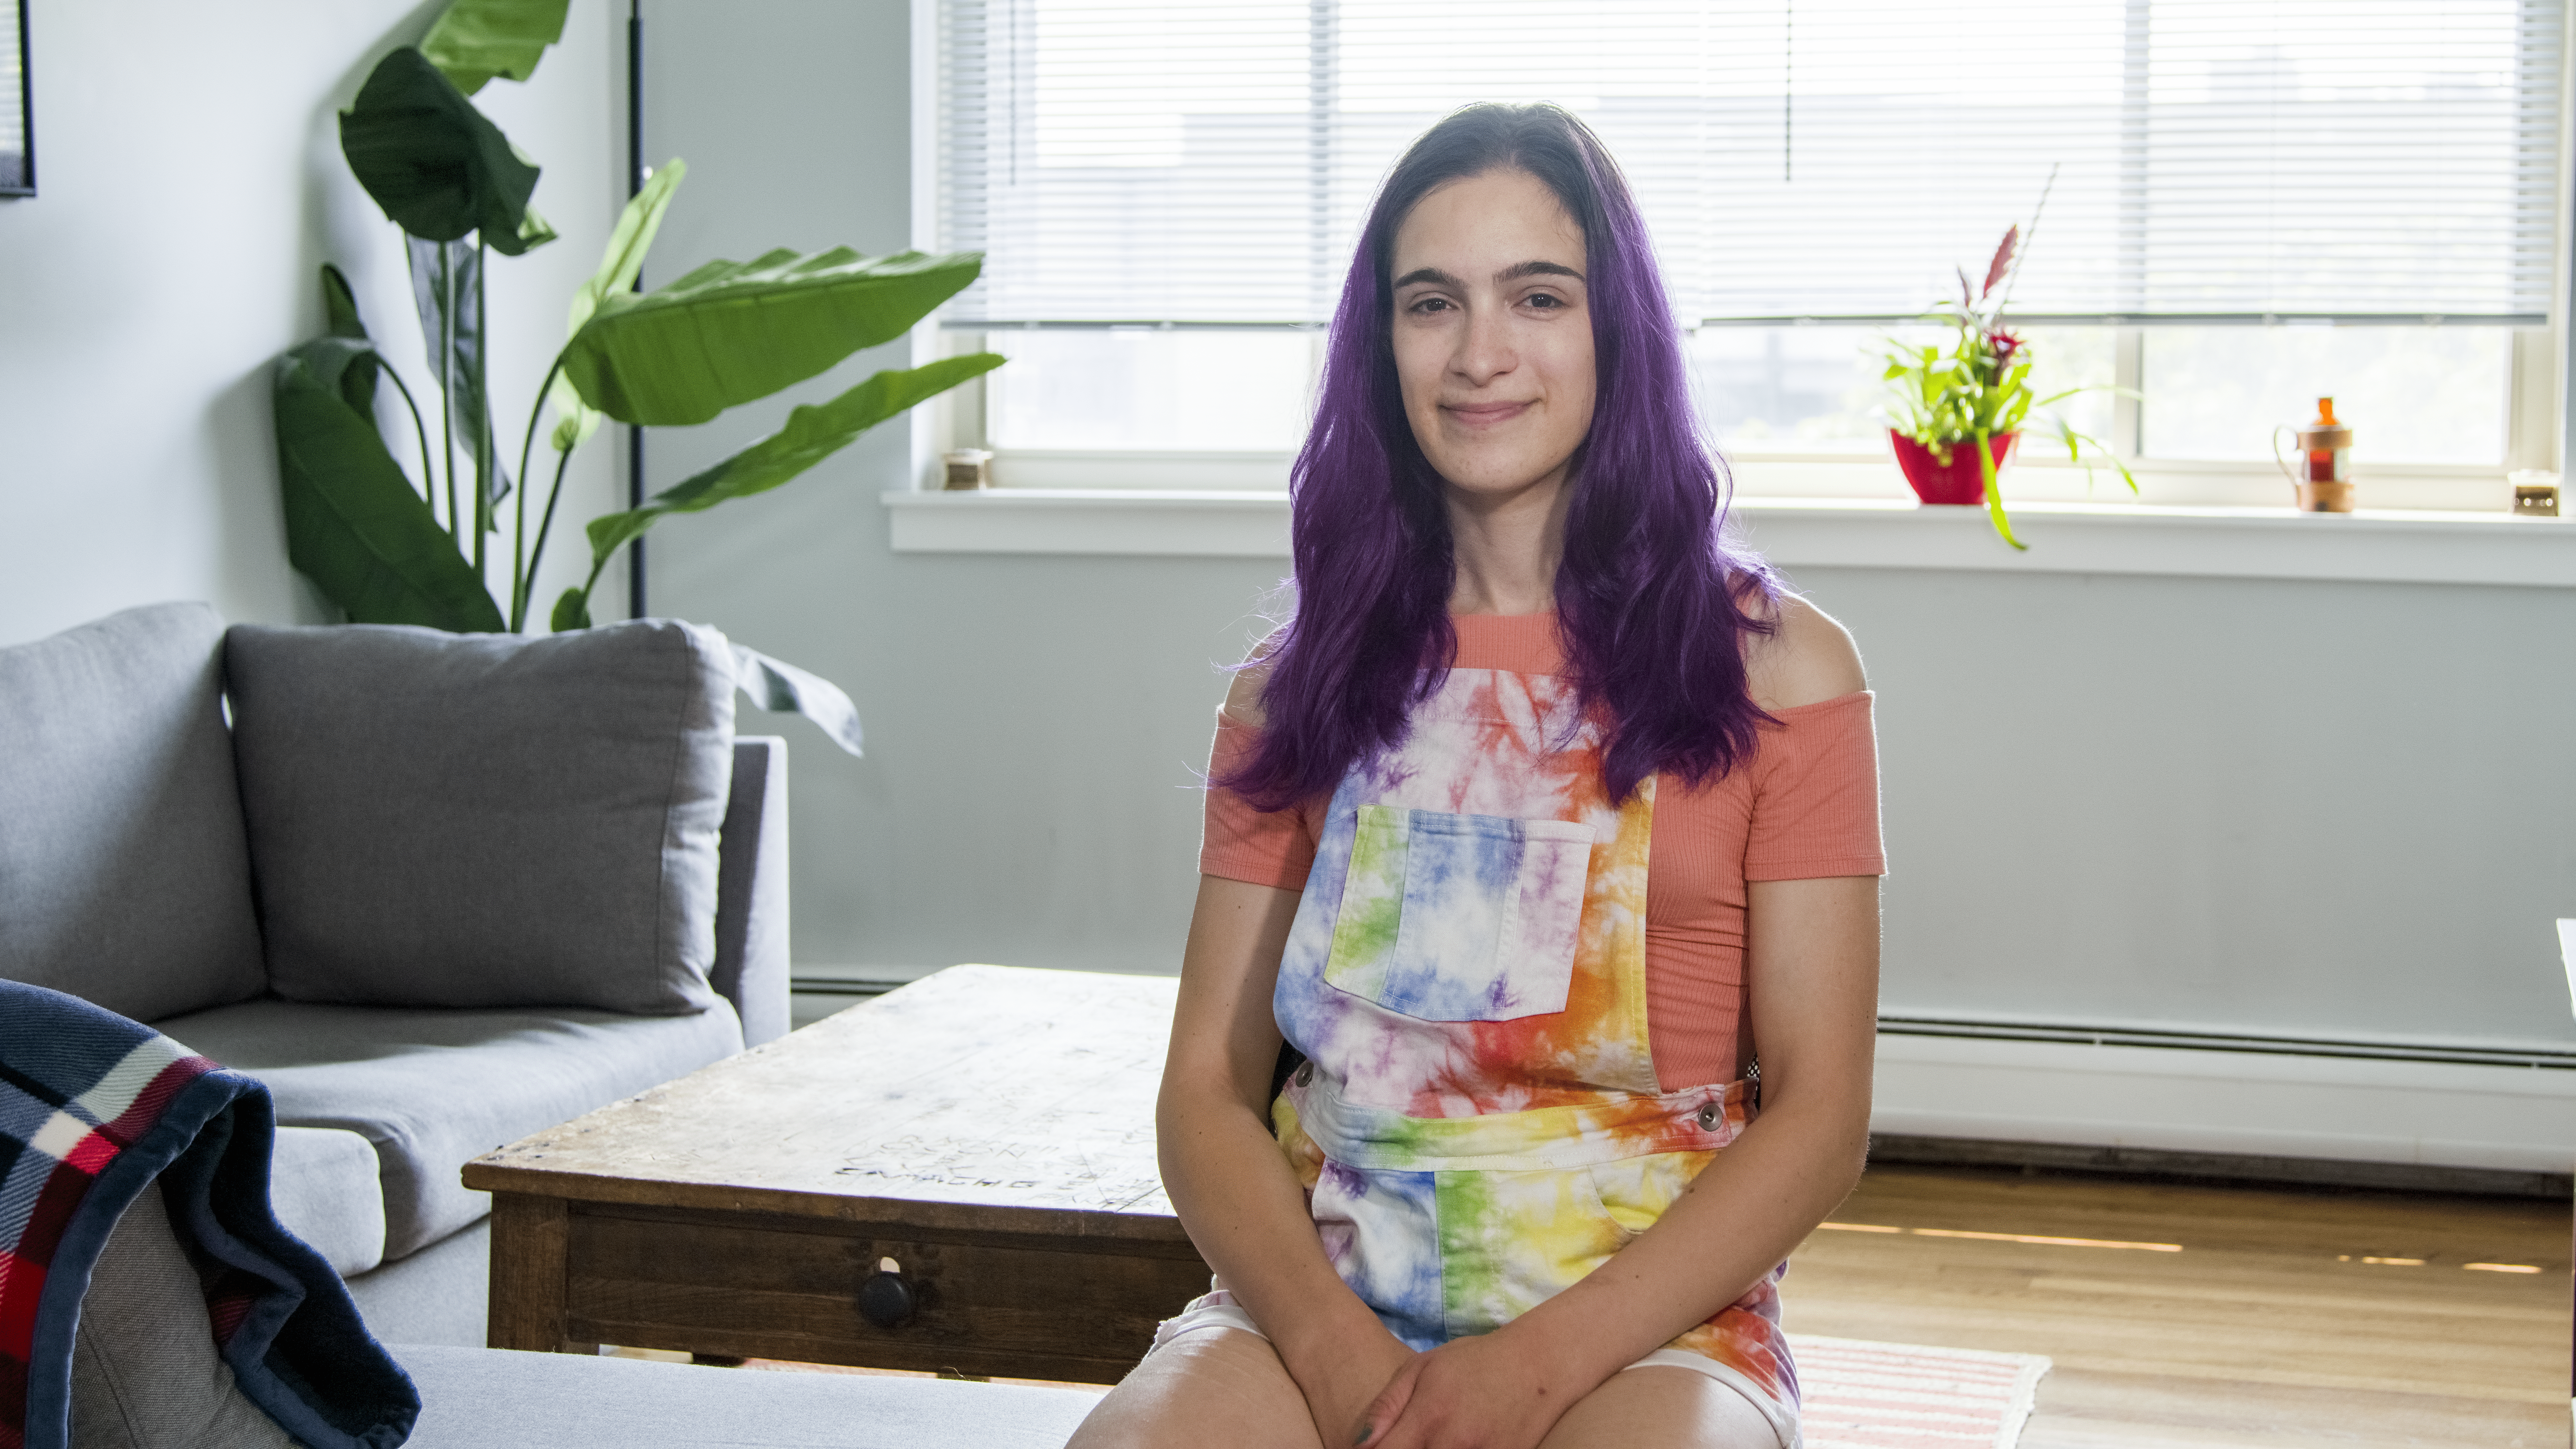 After Therapist Outs Student To Parents & Turns School Against Her, Trans Teen Finds a Way to Thrive.